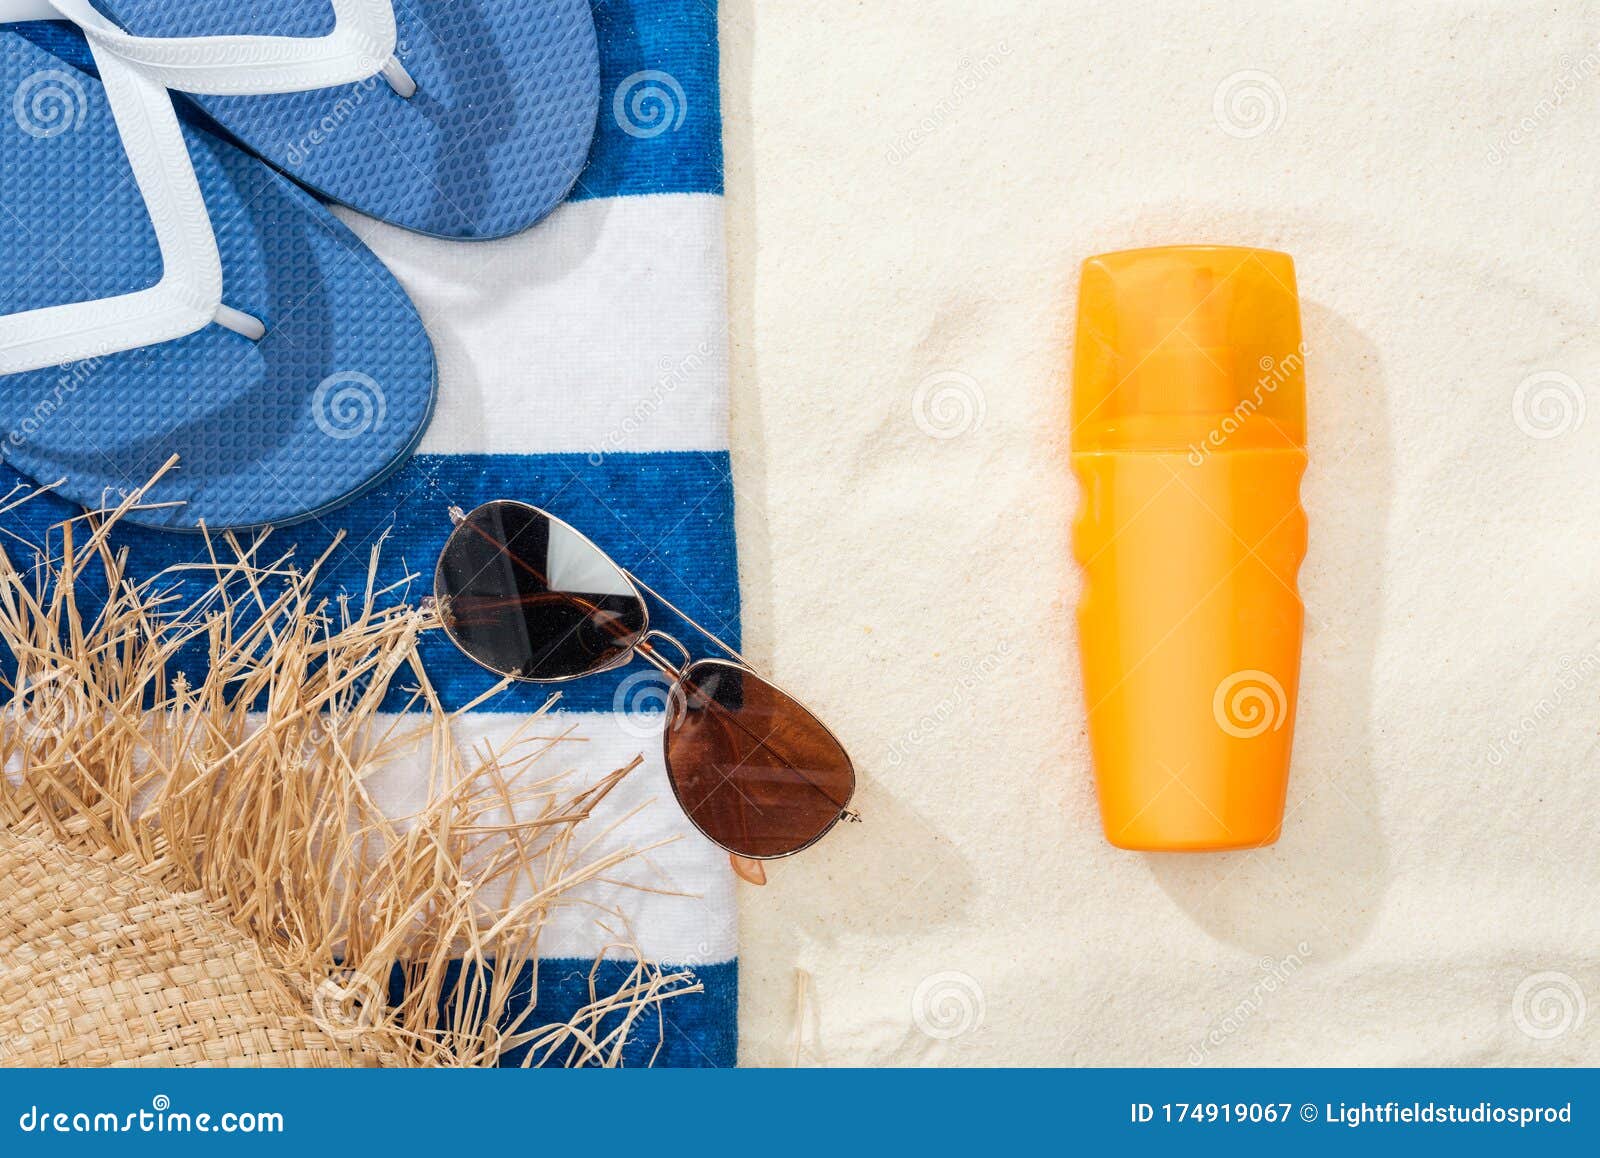 Top View of Sunscreen, Straw Hat, Flip Flops, Sunglasses and Striped ...